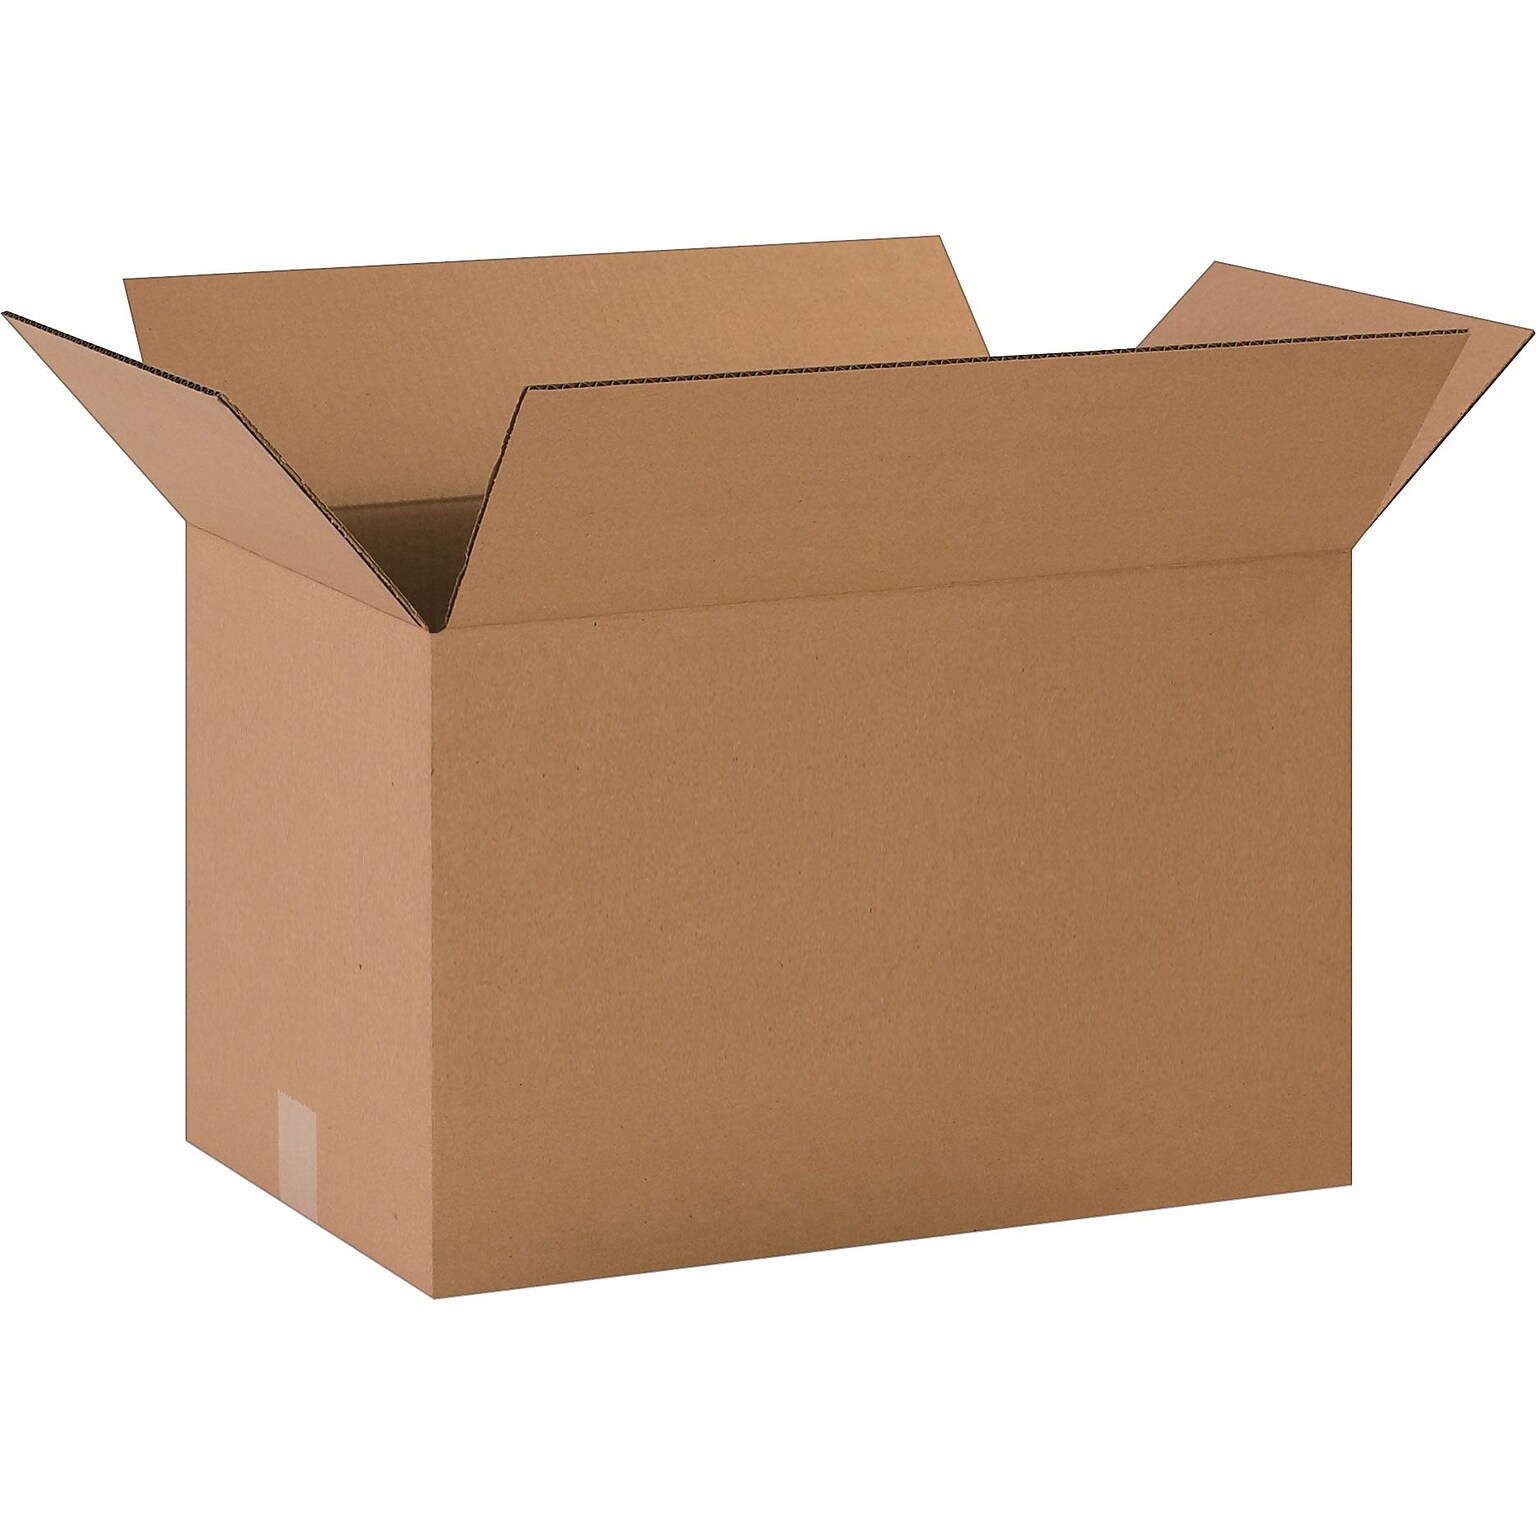 8 x 8 x 8, 32 ECT, Shipping Boxes